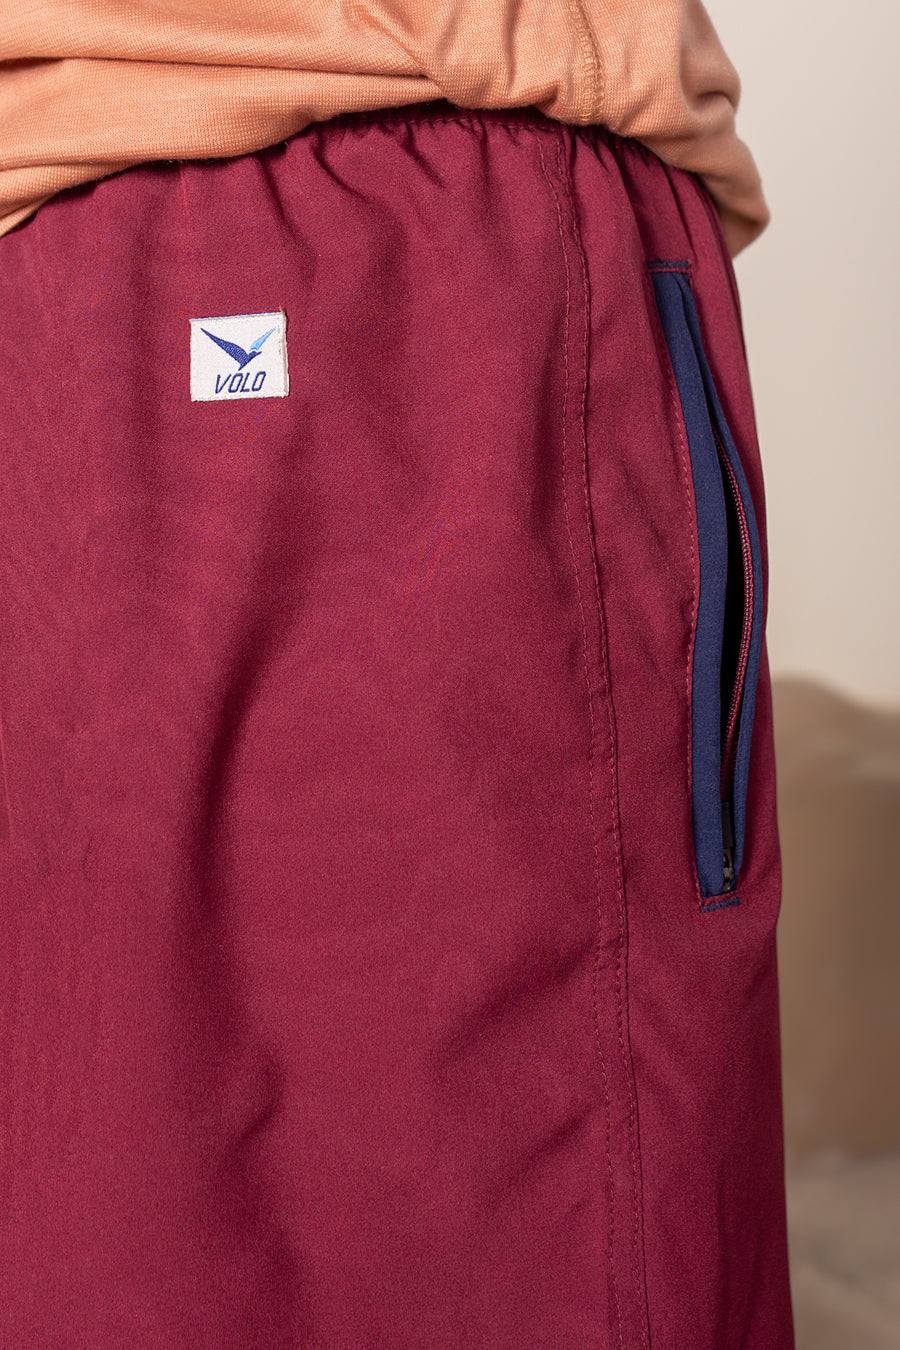 Men's Flight Shorts in Maroon | VOLO Apparel | Designed so you can feel fly and completely secure, the Flight Shorts 2.0 are made with an ultralight micro stretch fabric that is quick drying and comes with a three zipper pocket design. The smart pocket tech makes it so your stuff won’t bounce when you do. Reinforced stitching so it can handle everything you will throw at it. The one short for your every adventure.